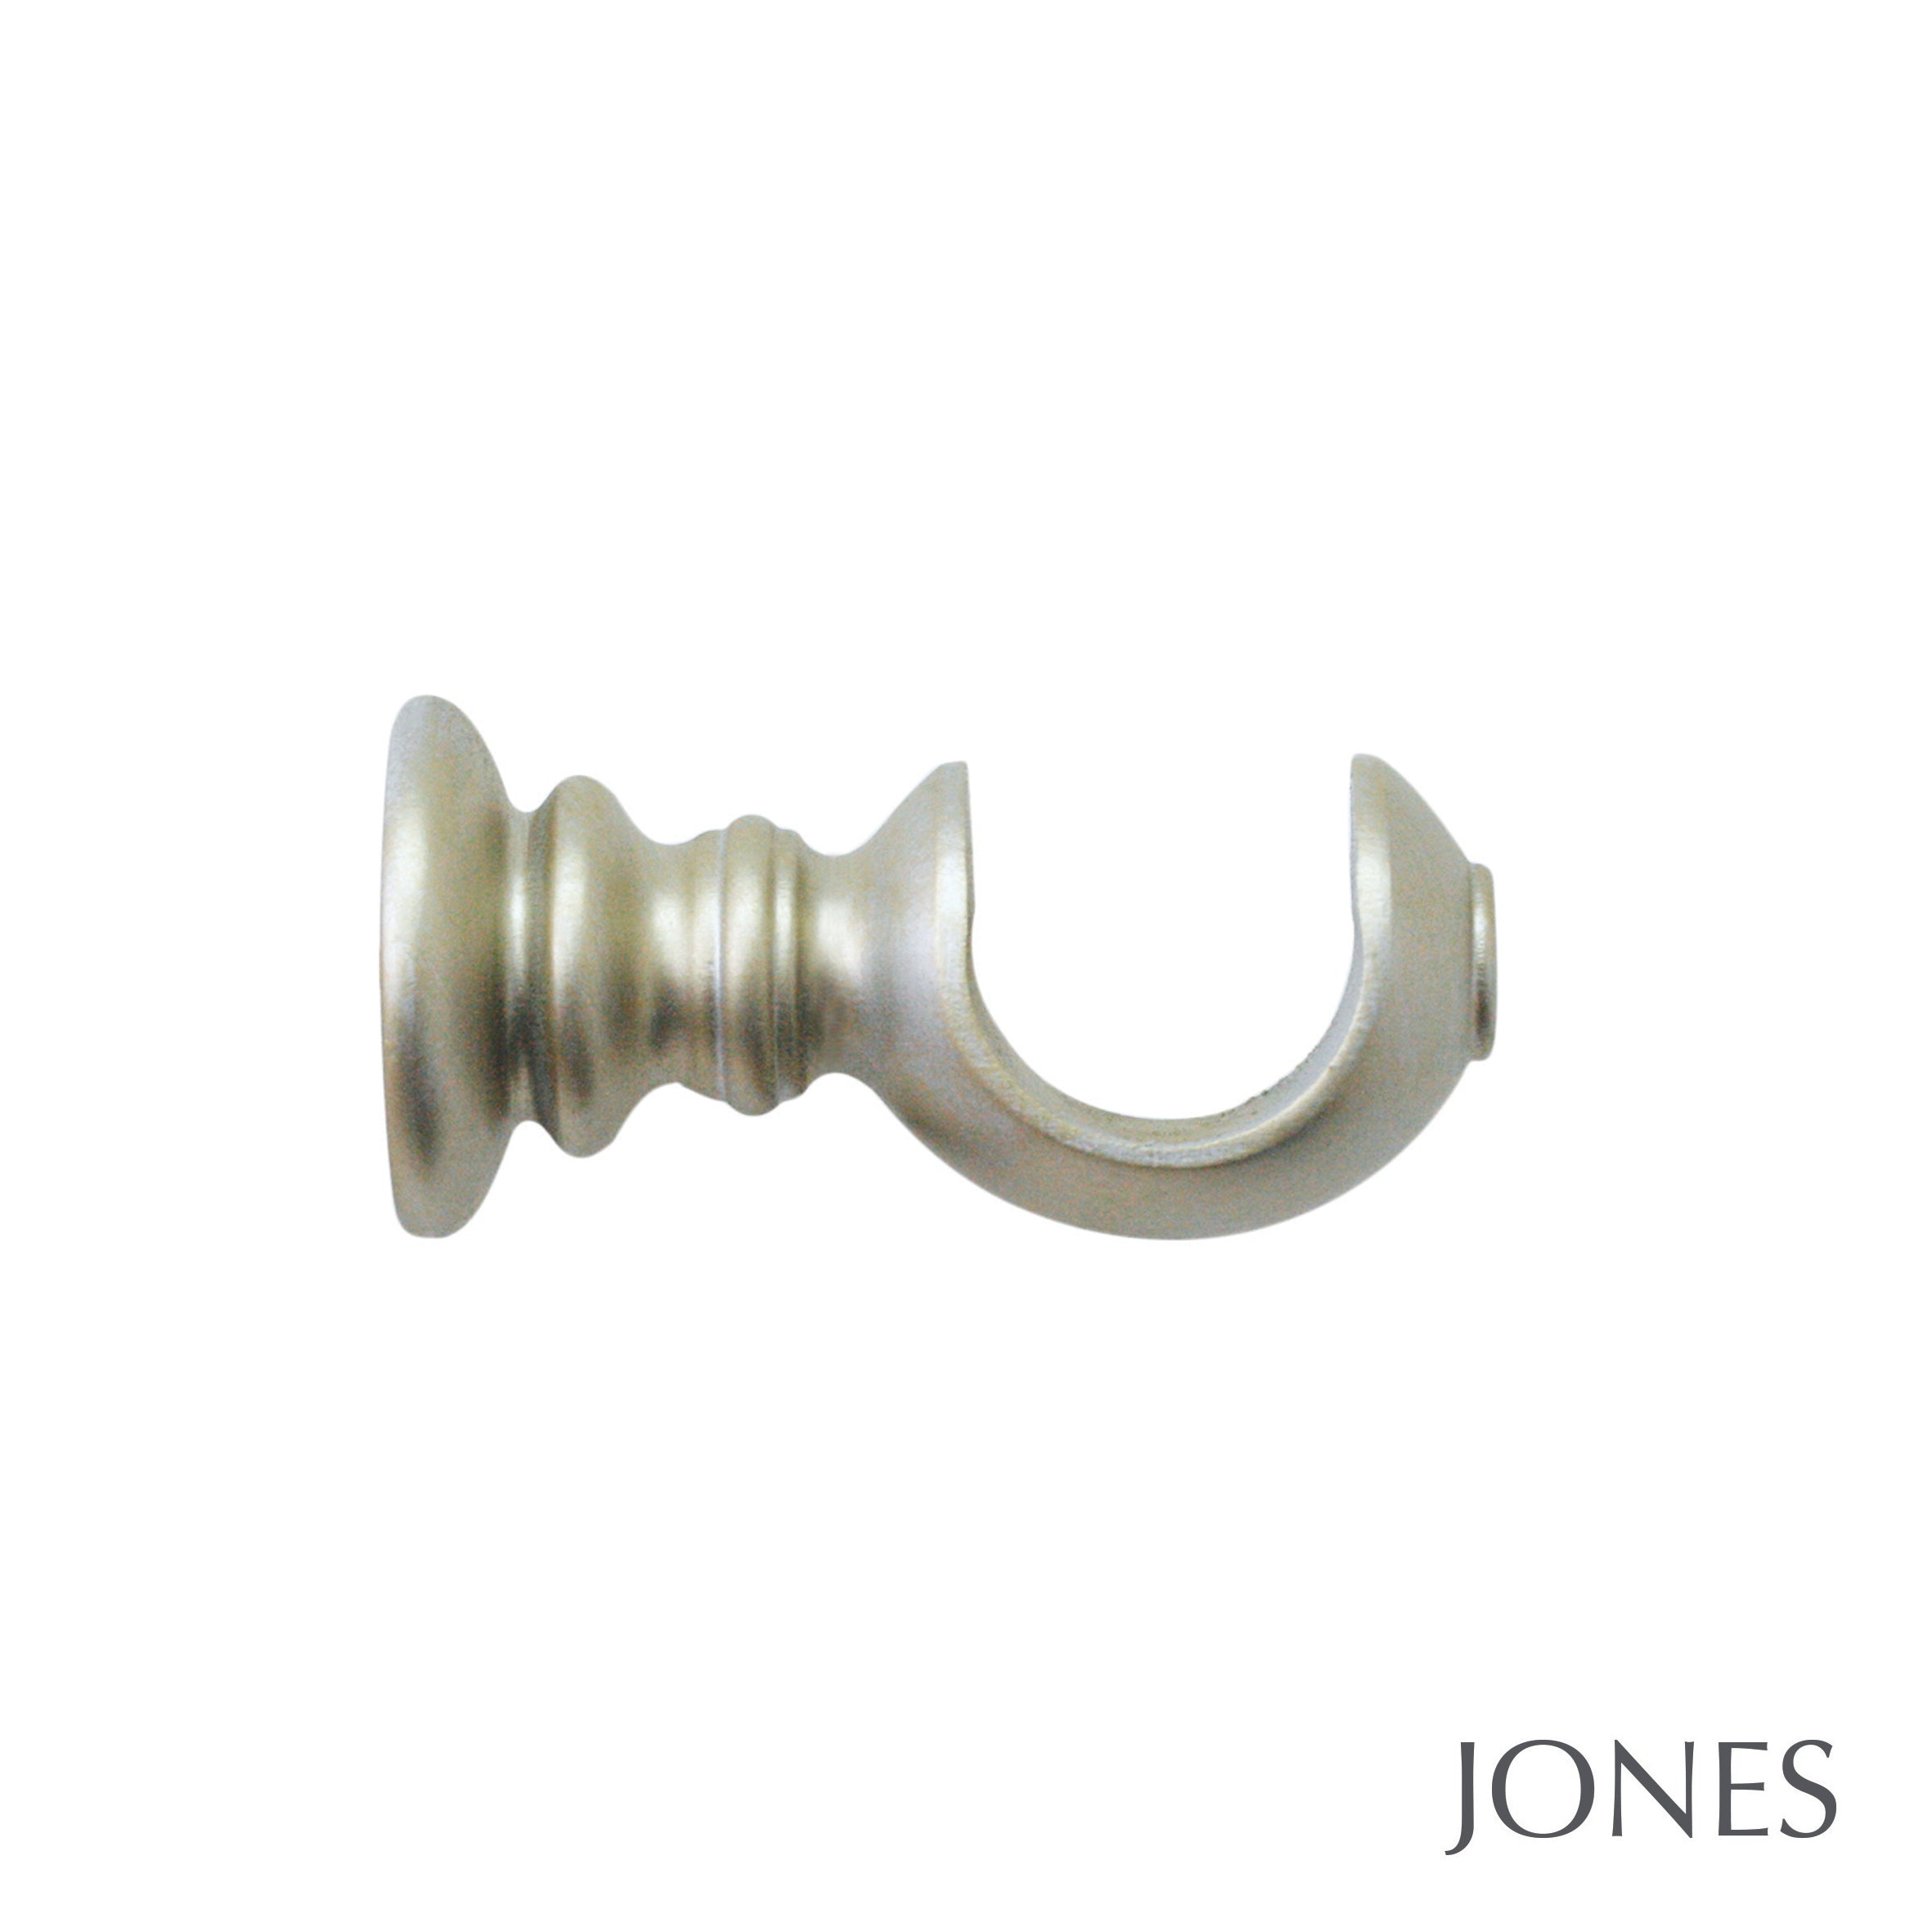 Jones Interiors Florentine Rope Finial Curtain Pole Set in Champagne Silver